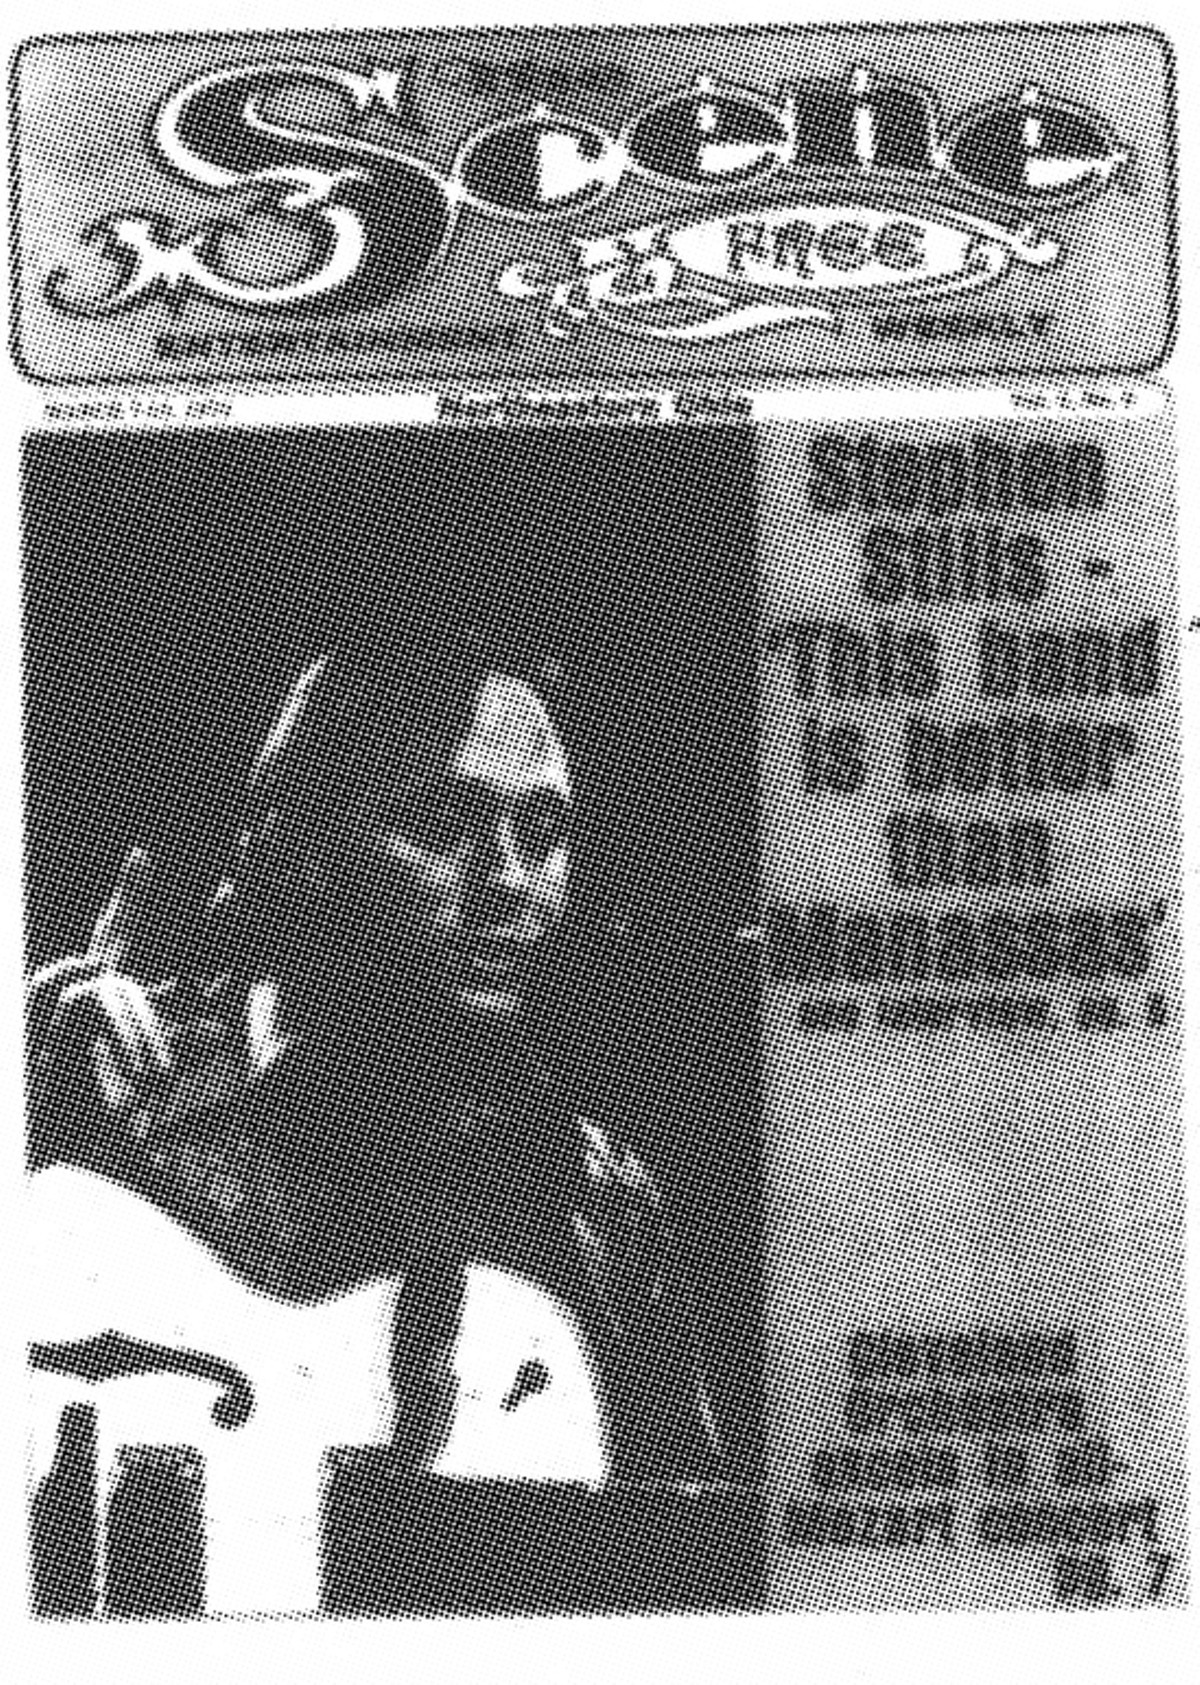 Rewind: 46 Years Ago On This Date Stephen Stills Made the Cover of Scene